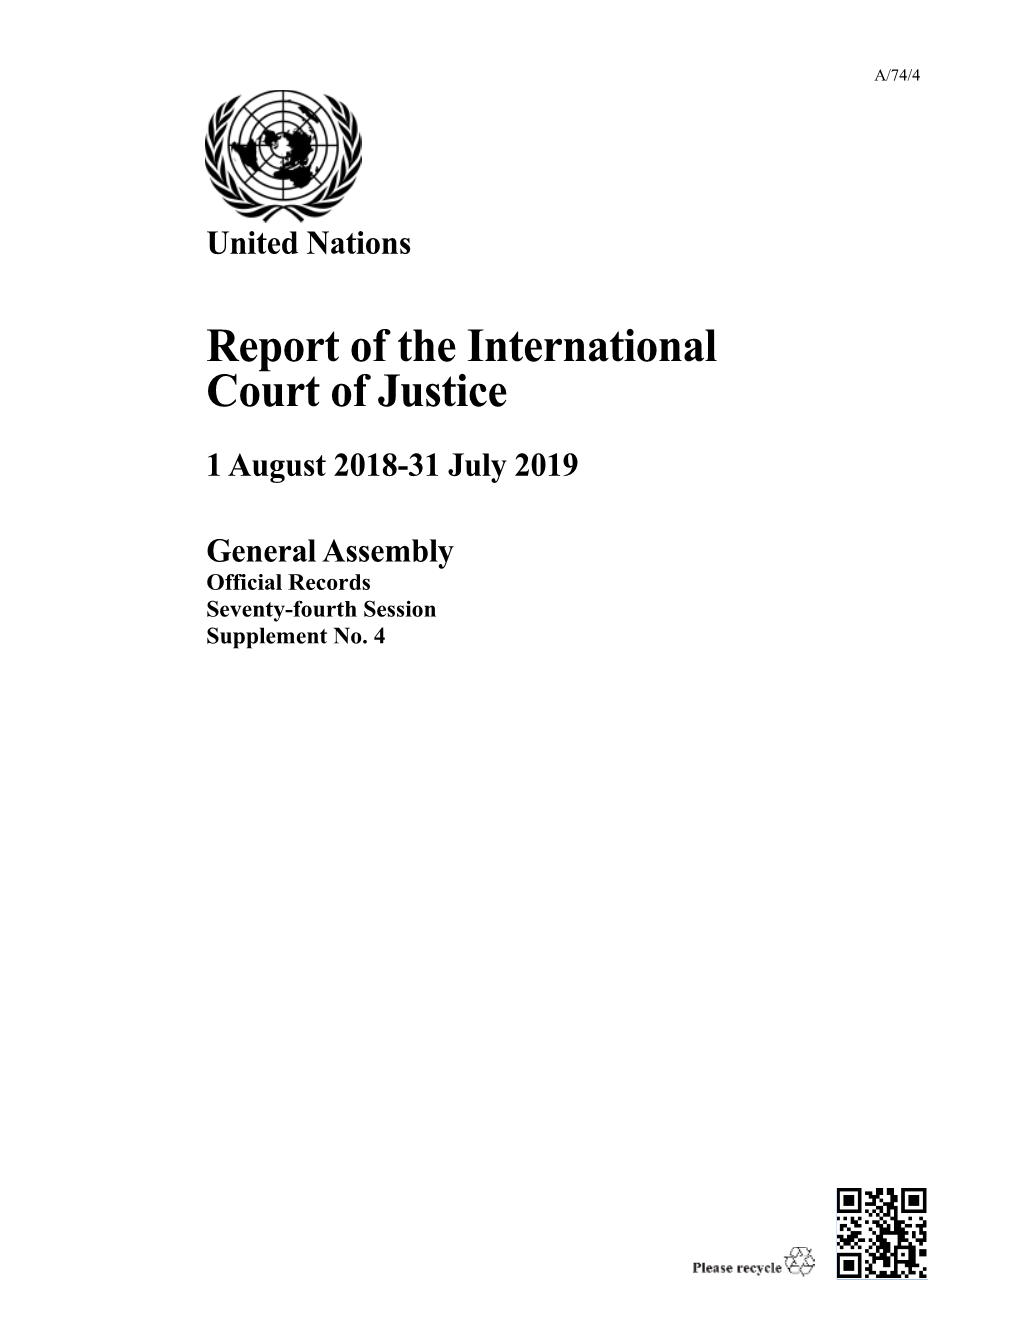 Report of the International Court of Justice